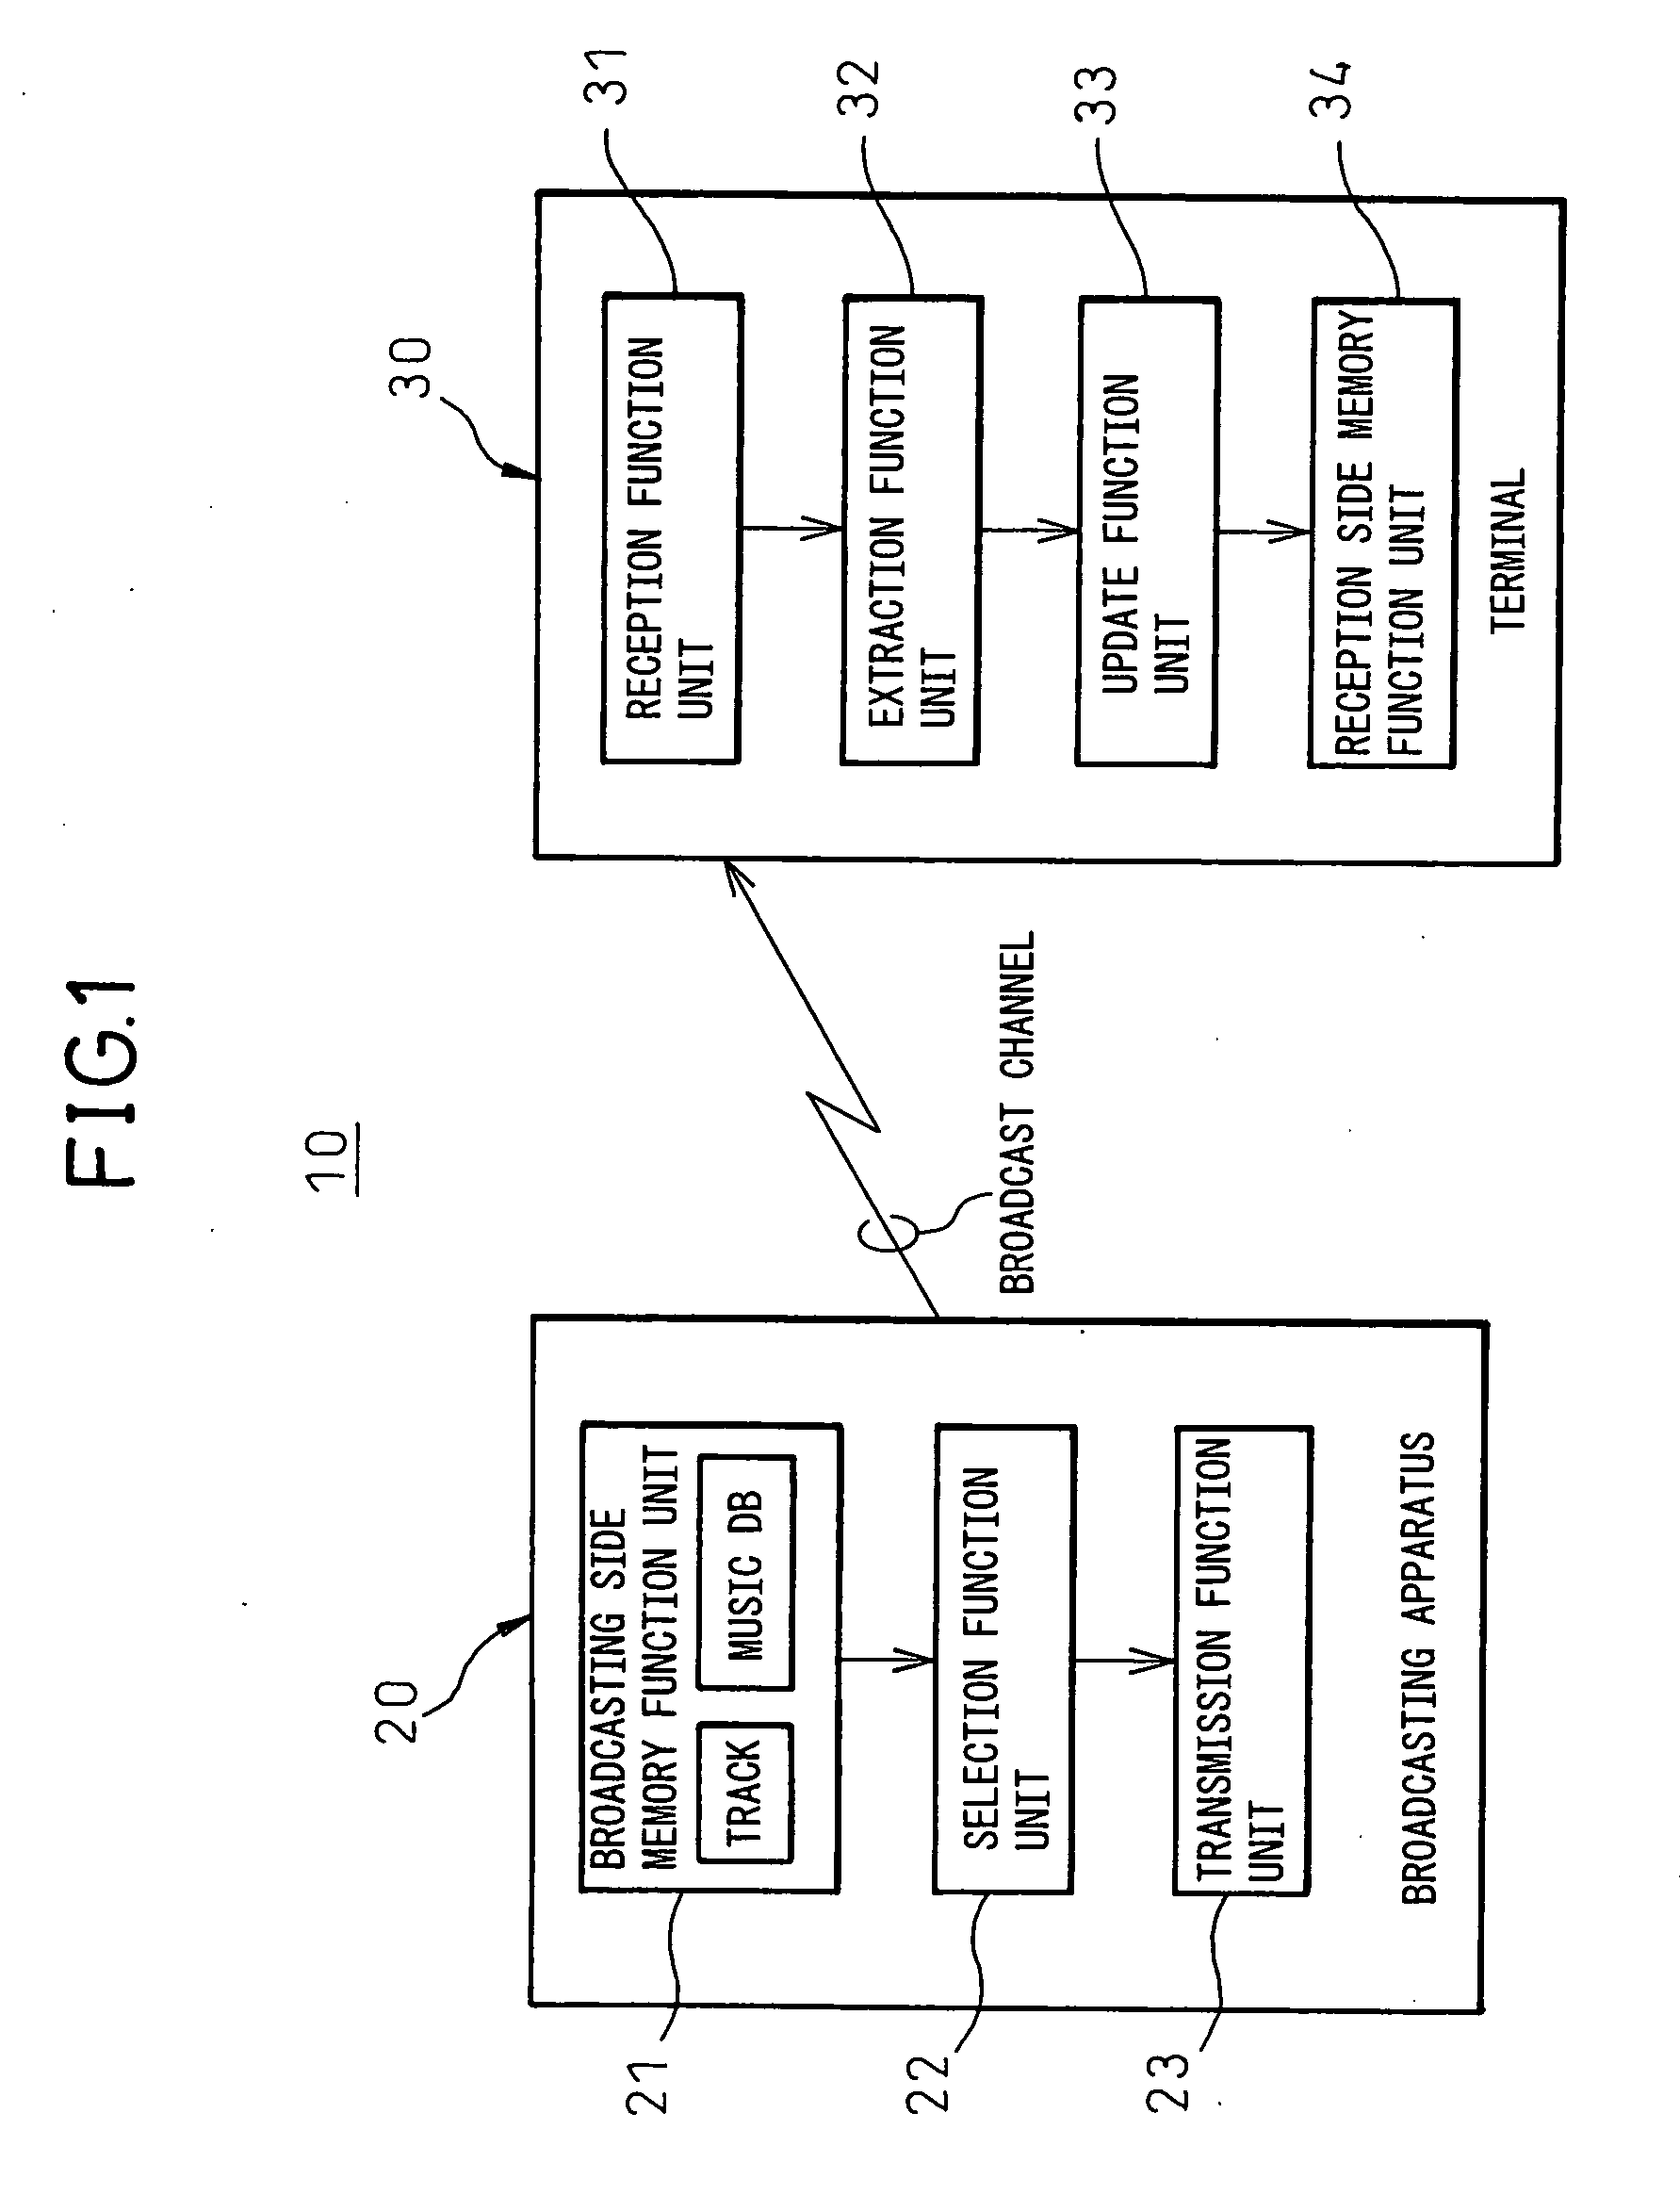 Music information,updating system, music information broadcasting apparatus, terminal apparatus having music information updating function, music information updating method, music information broadcasting method, and music information updating method of terminal apparatus